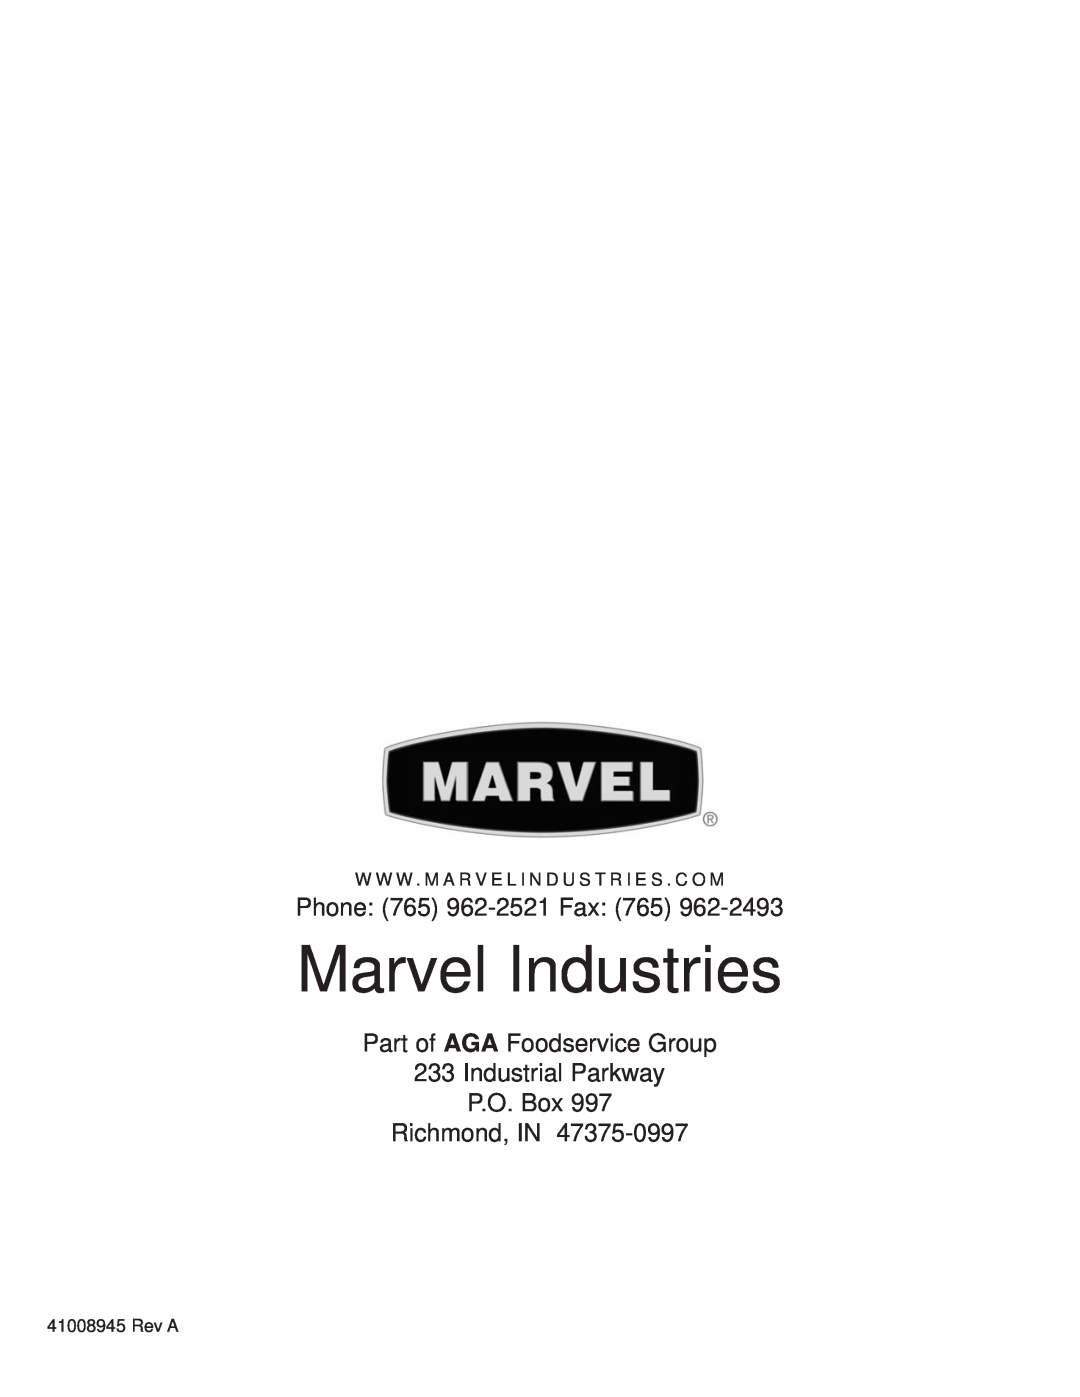 Marvel Industries 3SBAR manual Marvel Industries, Phone 765 962-2521Fax, Part of AGA Foodservice Group 